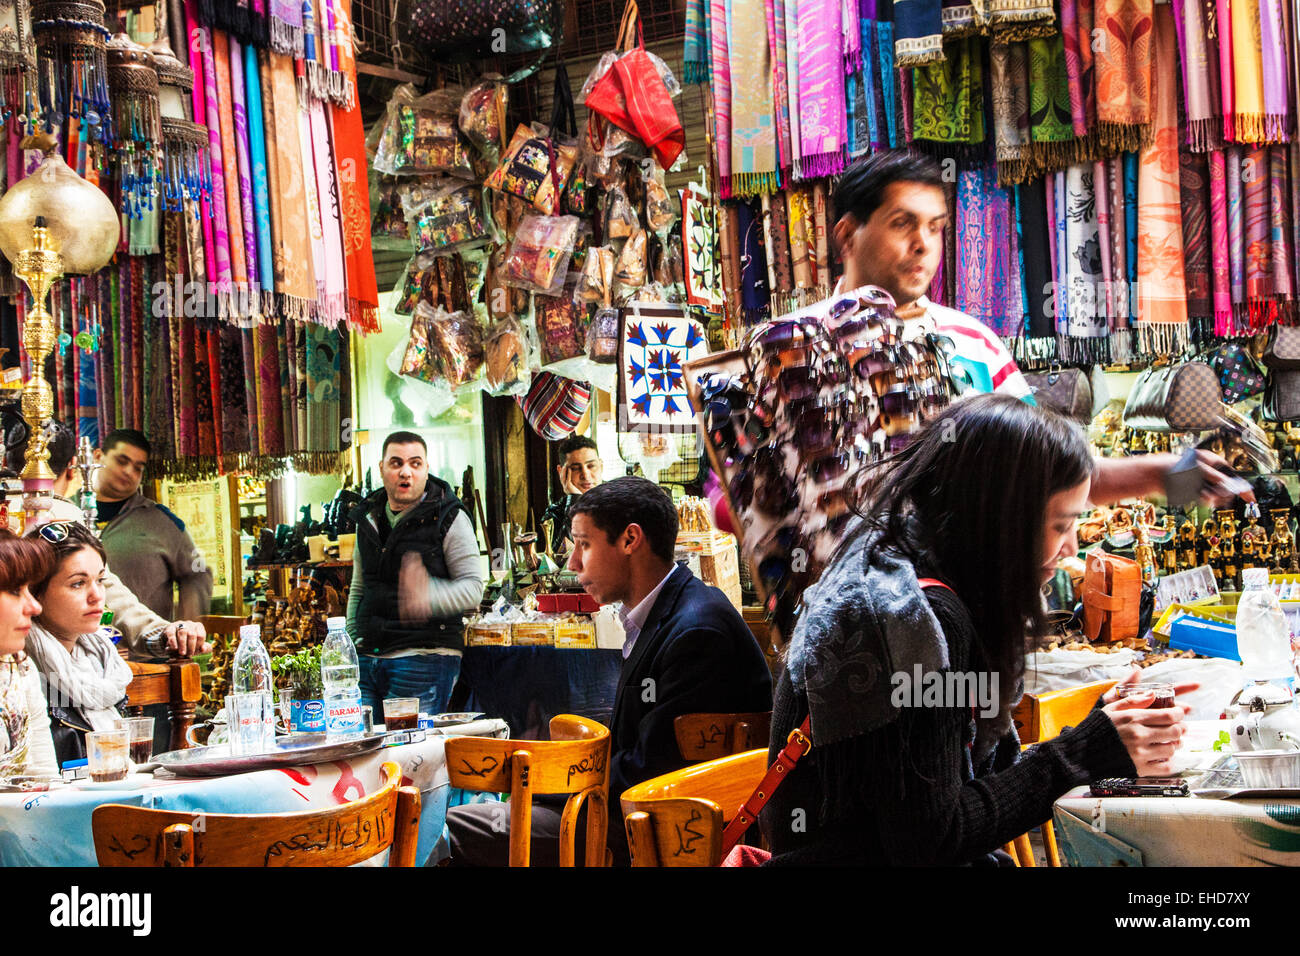 A busy cafe scene in the Khan el-Khalili souk in Cairo. Stock Photo